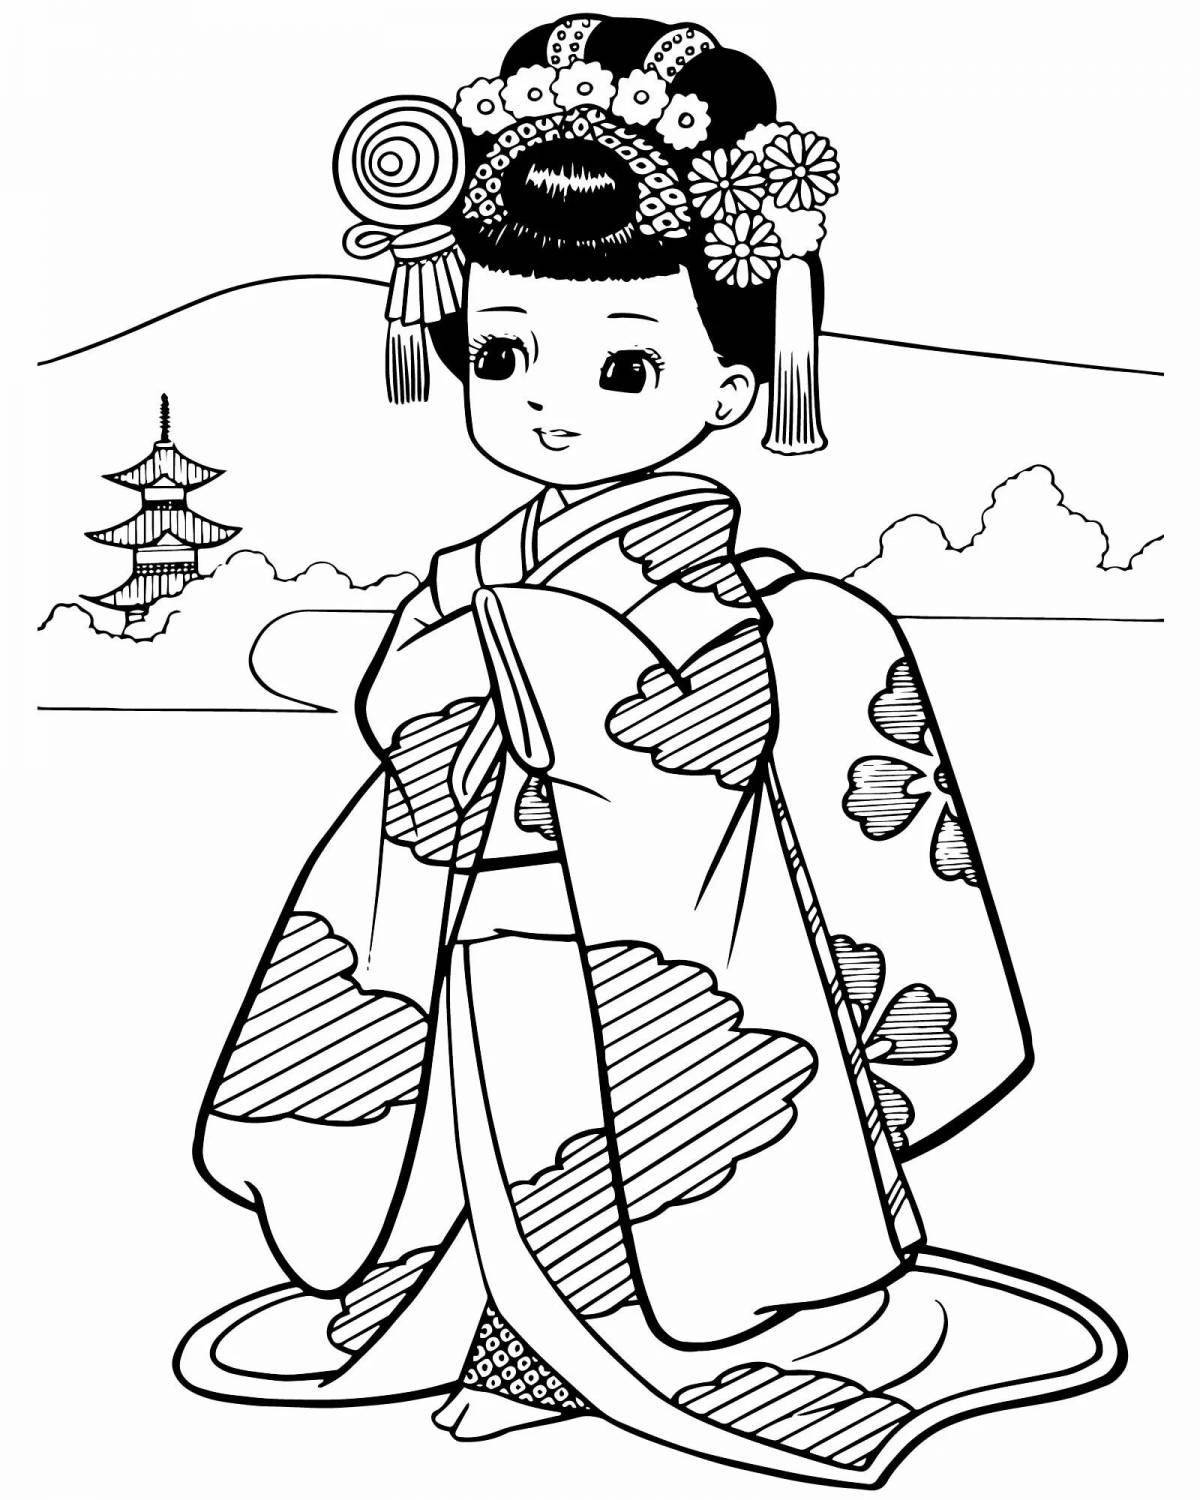 Colorful Chinese girl coloring book